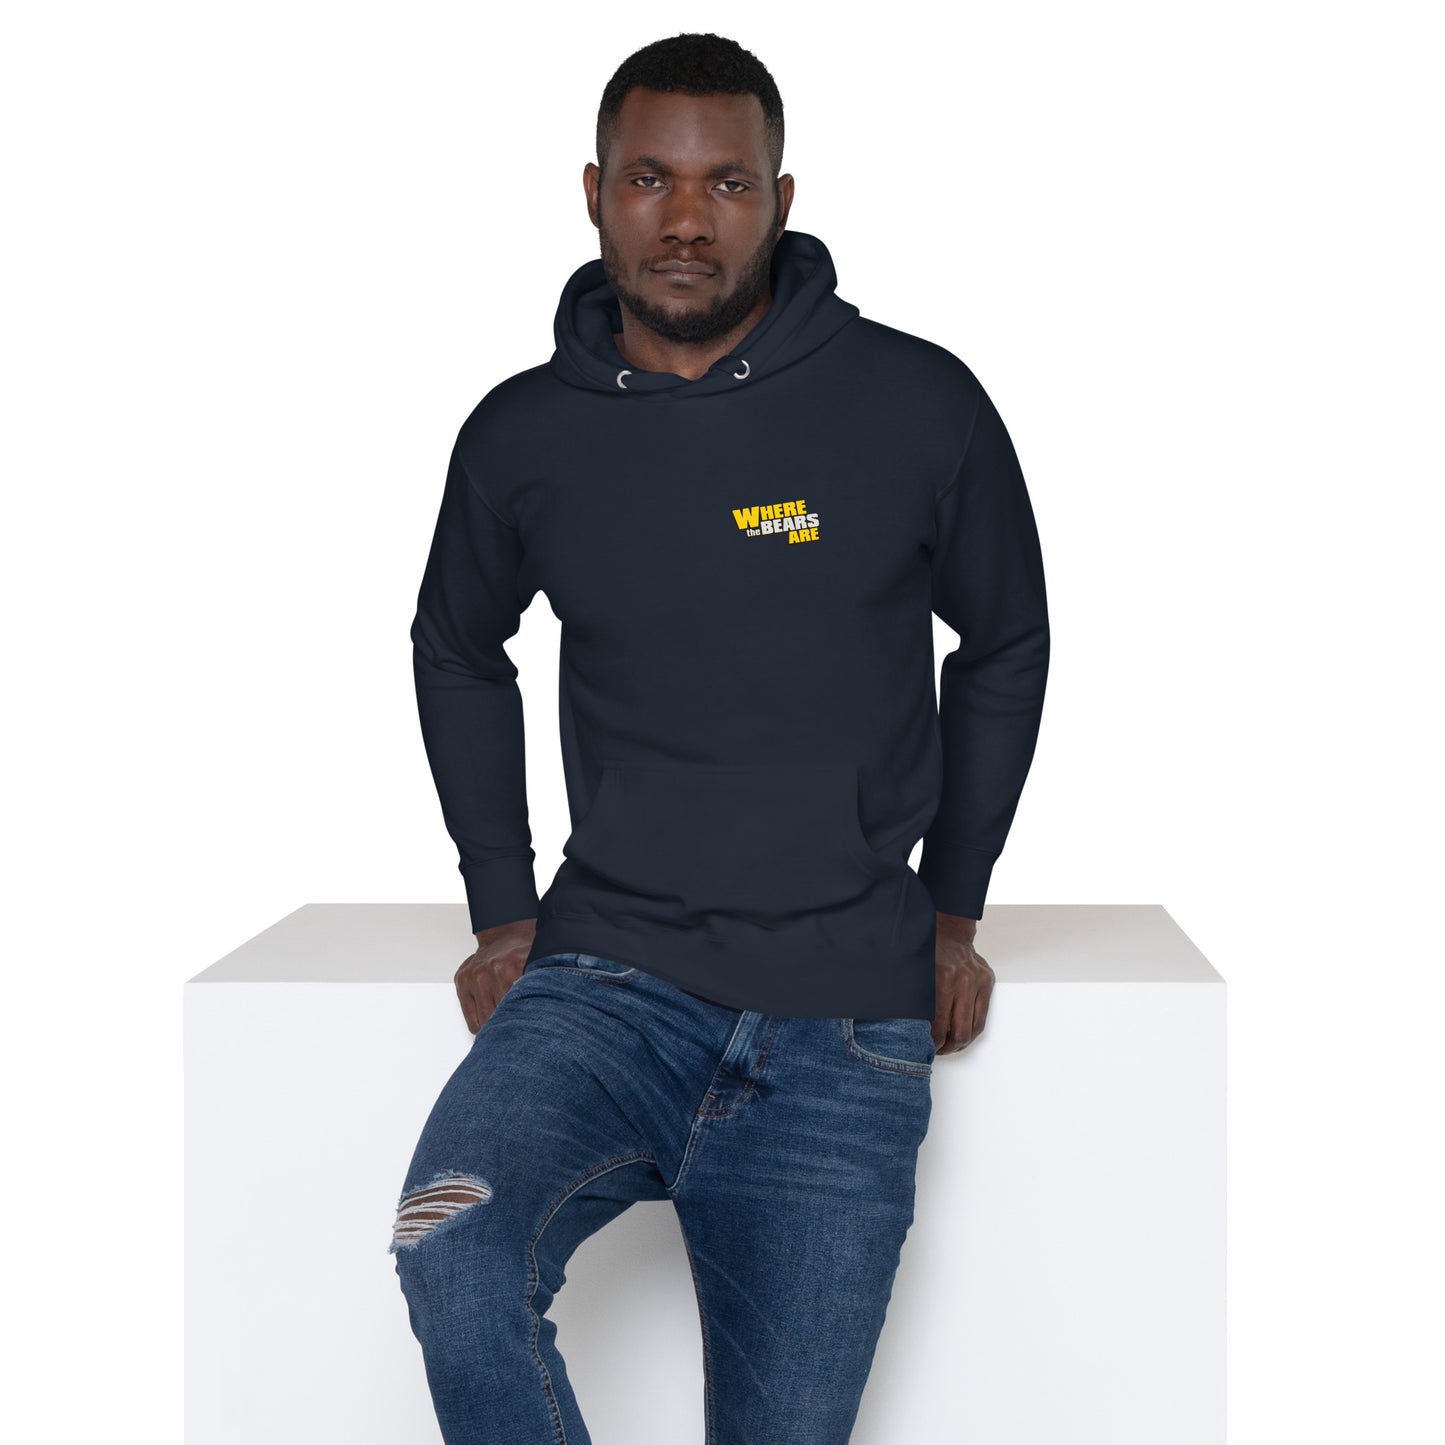 'Where The Bears Are' Small Logo Unisex Hoodie